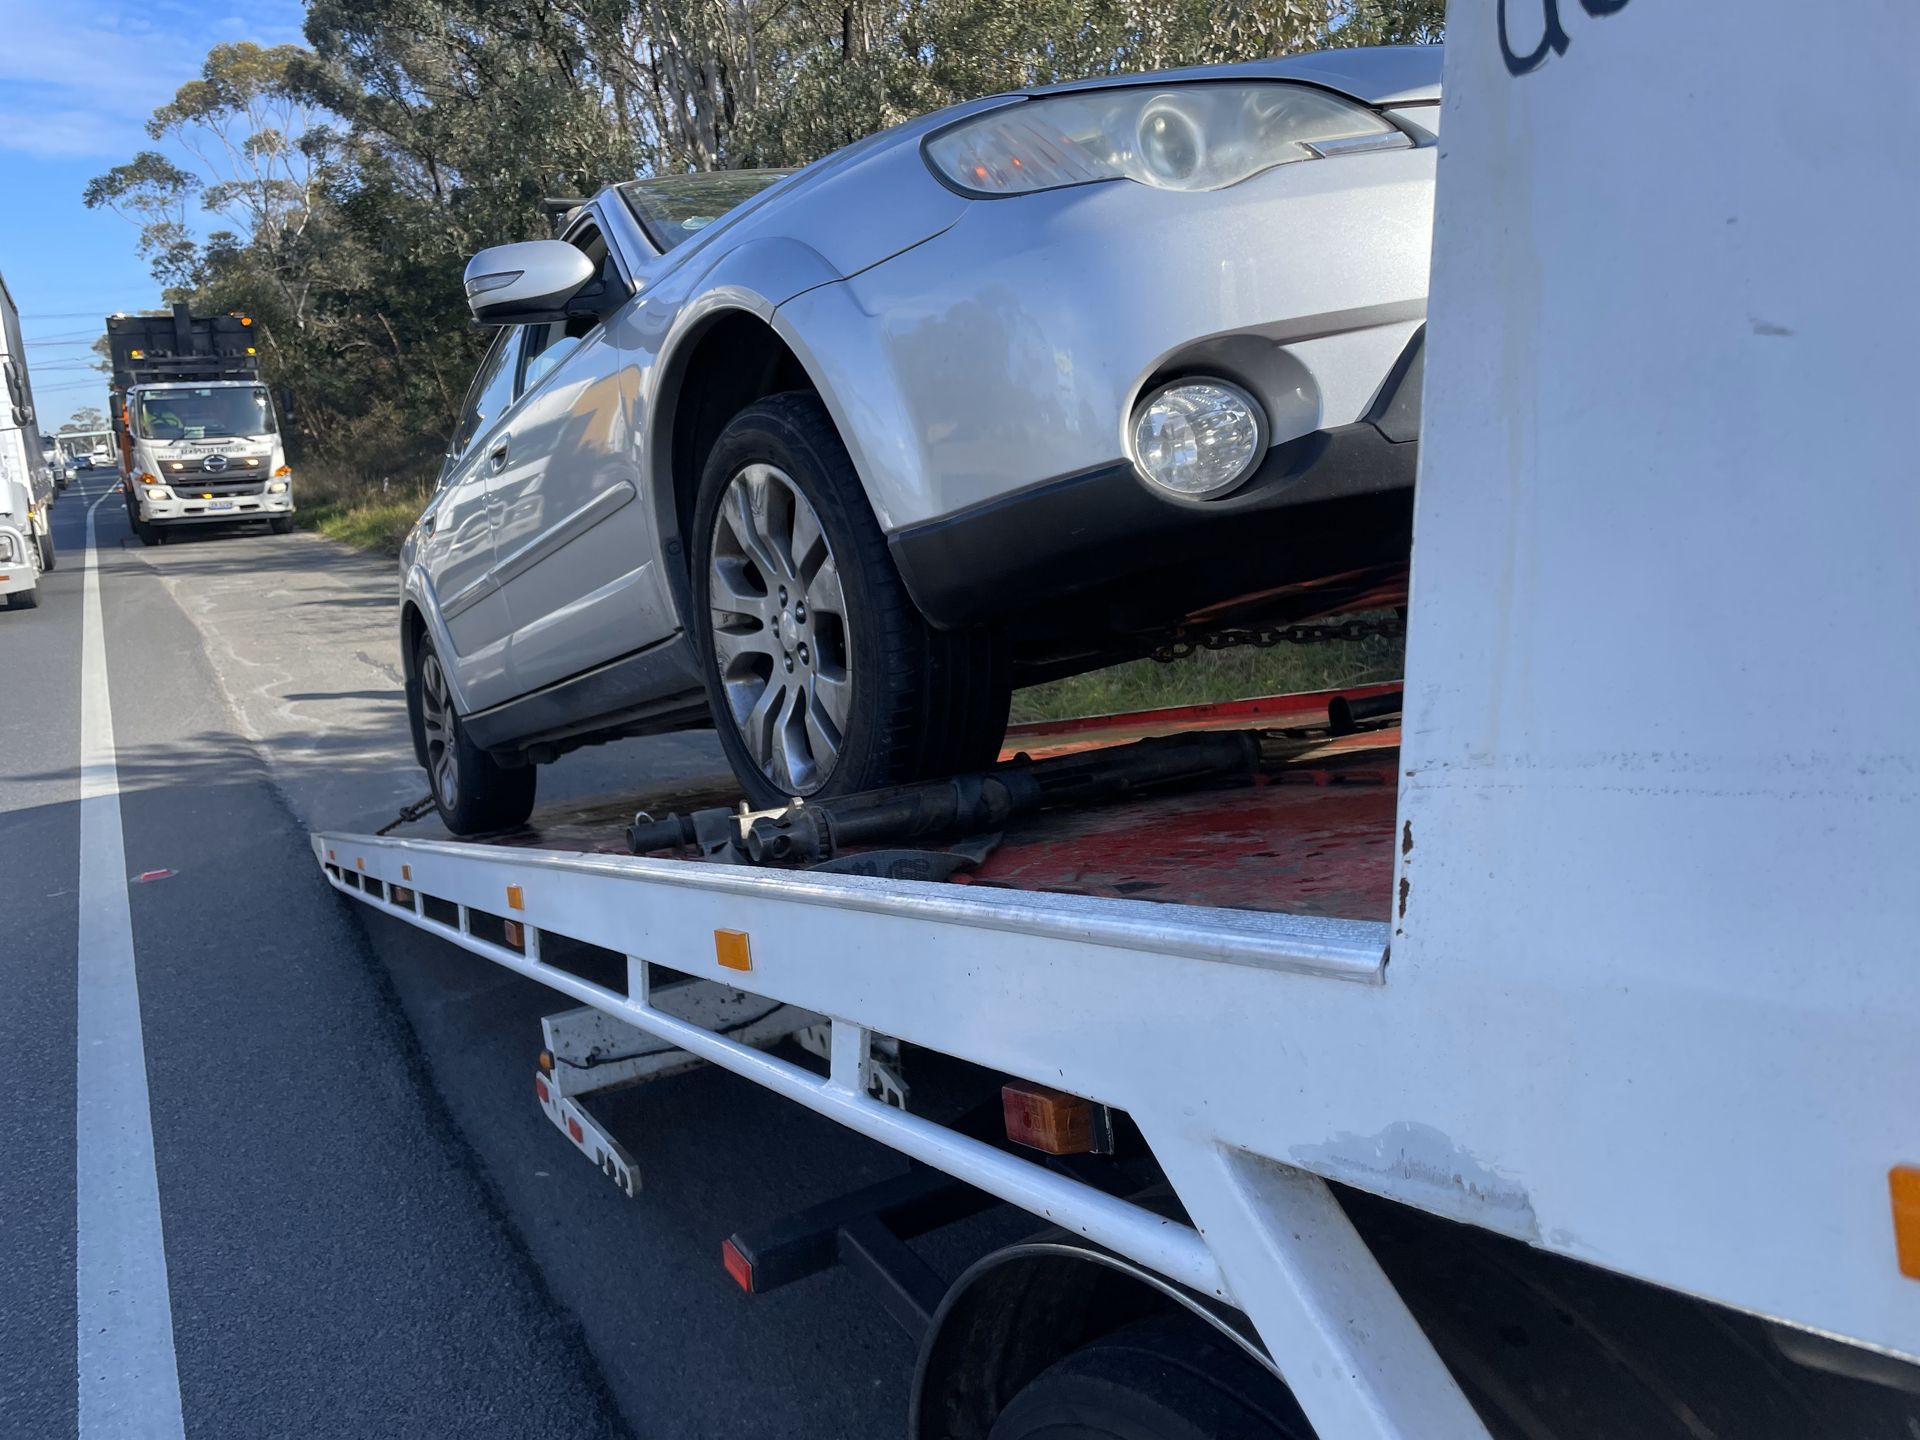 White truck towing smaller truck | Blacktown, NSW | Eastern Creek Towing